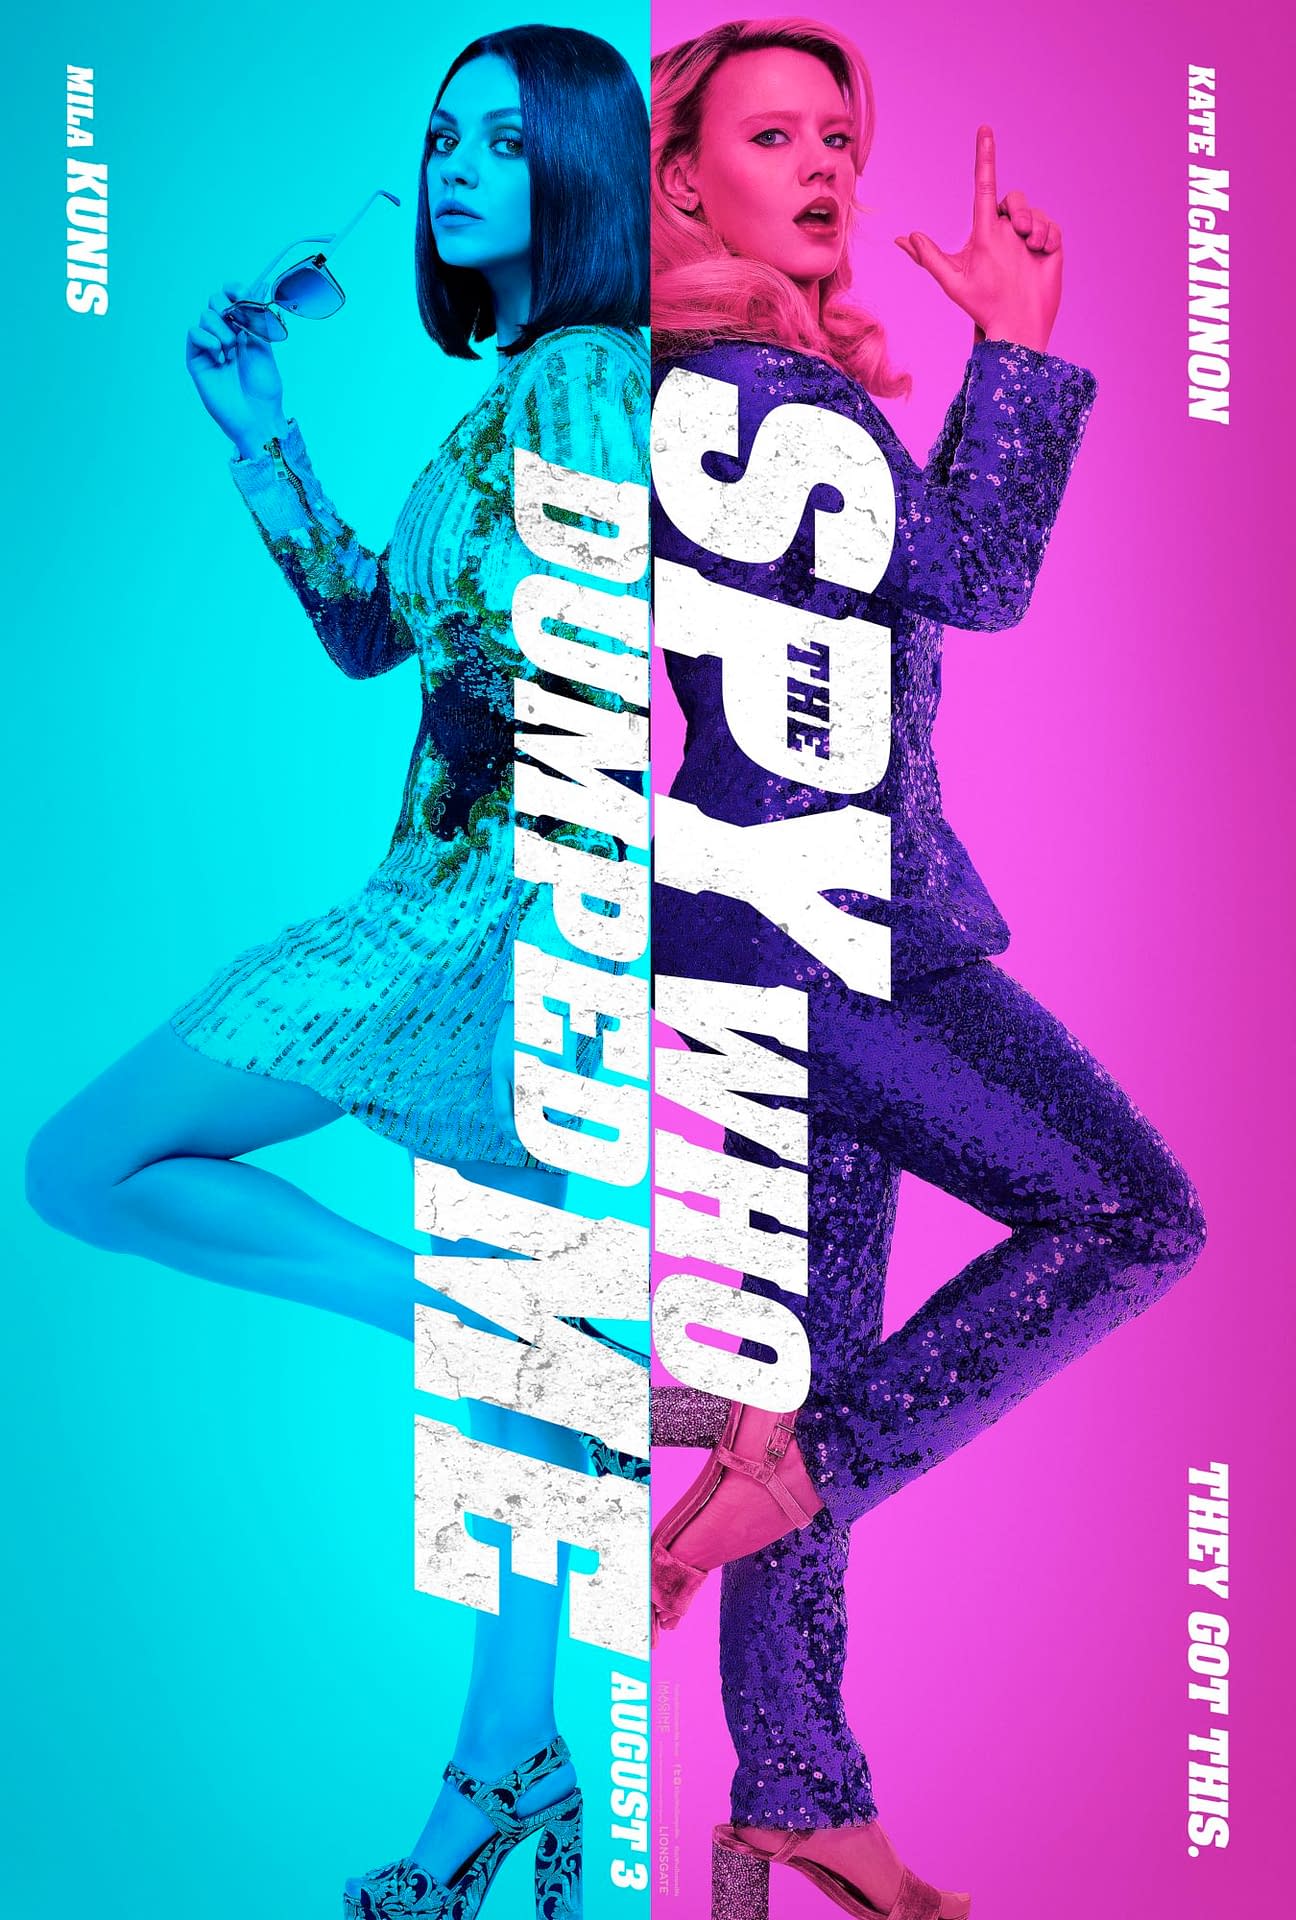 New Trailer and Posters for The Spy Who Dumped Me